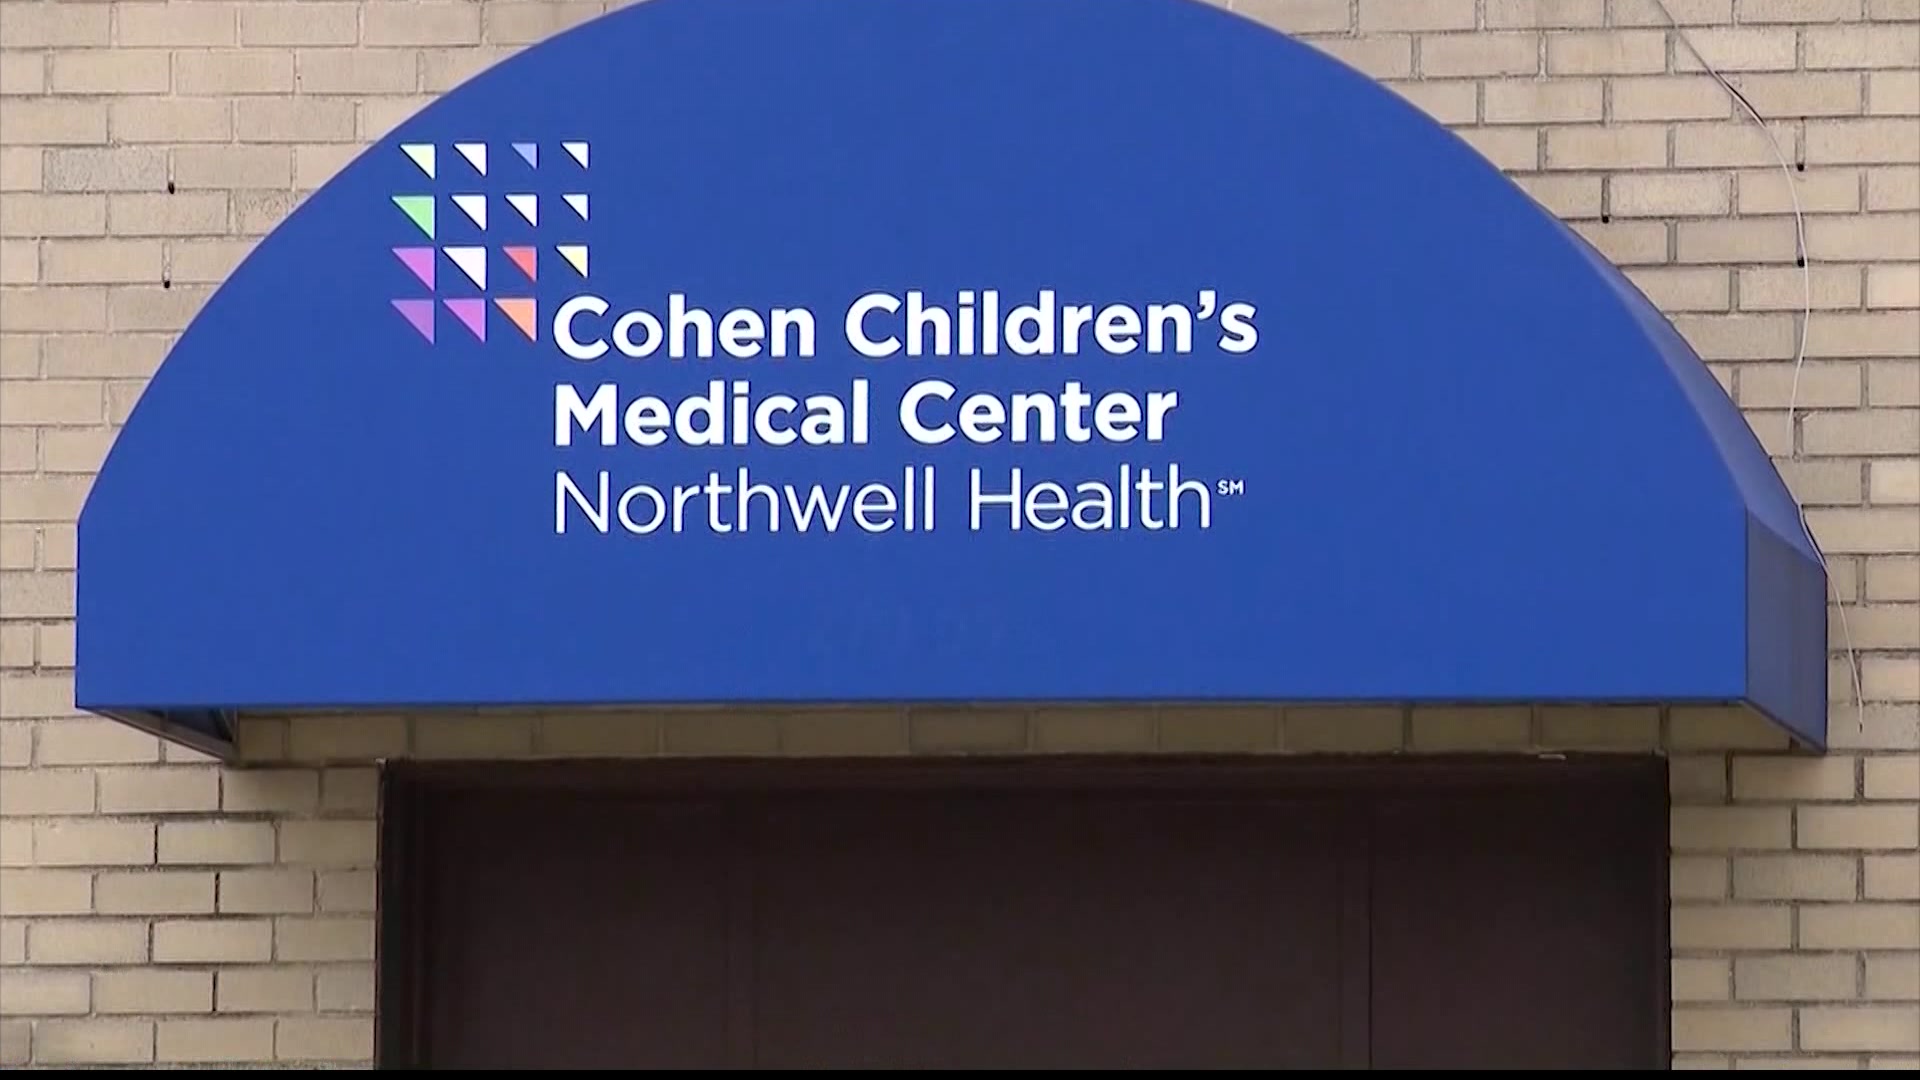 Health officials in Nassau issue warning of possible measles exposure at Cohen Children’s Medical Center